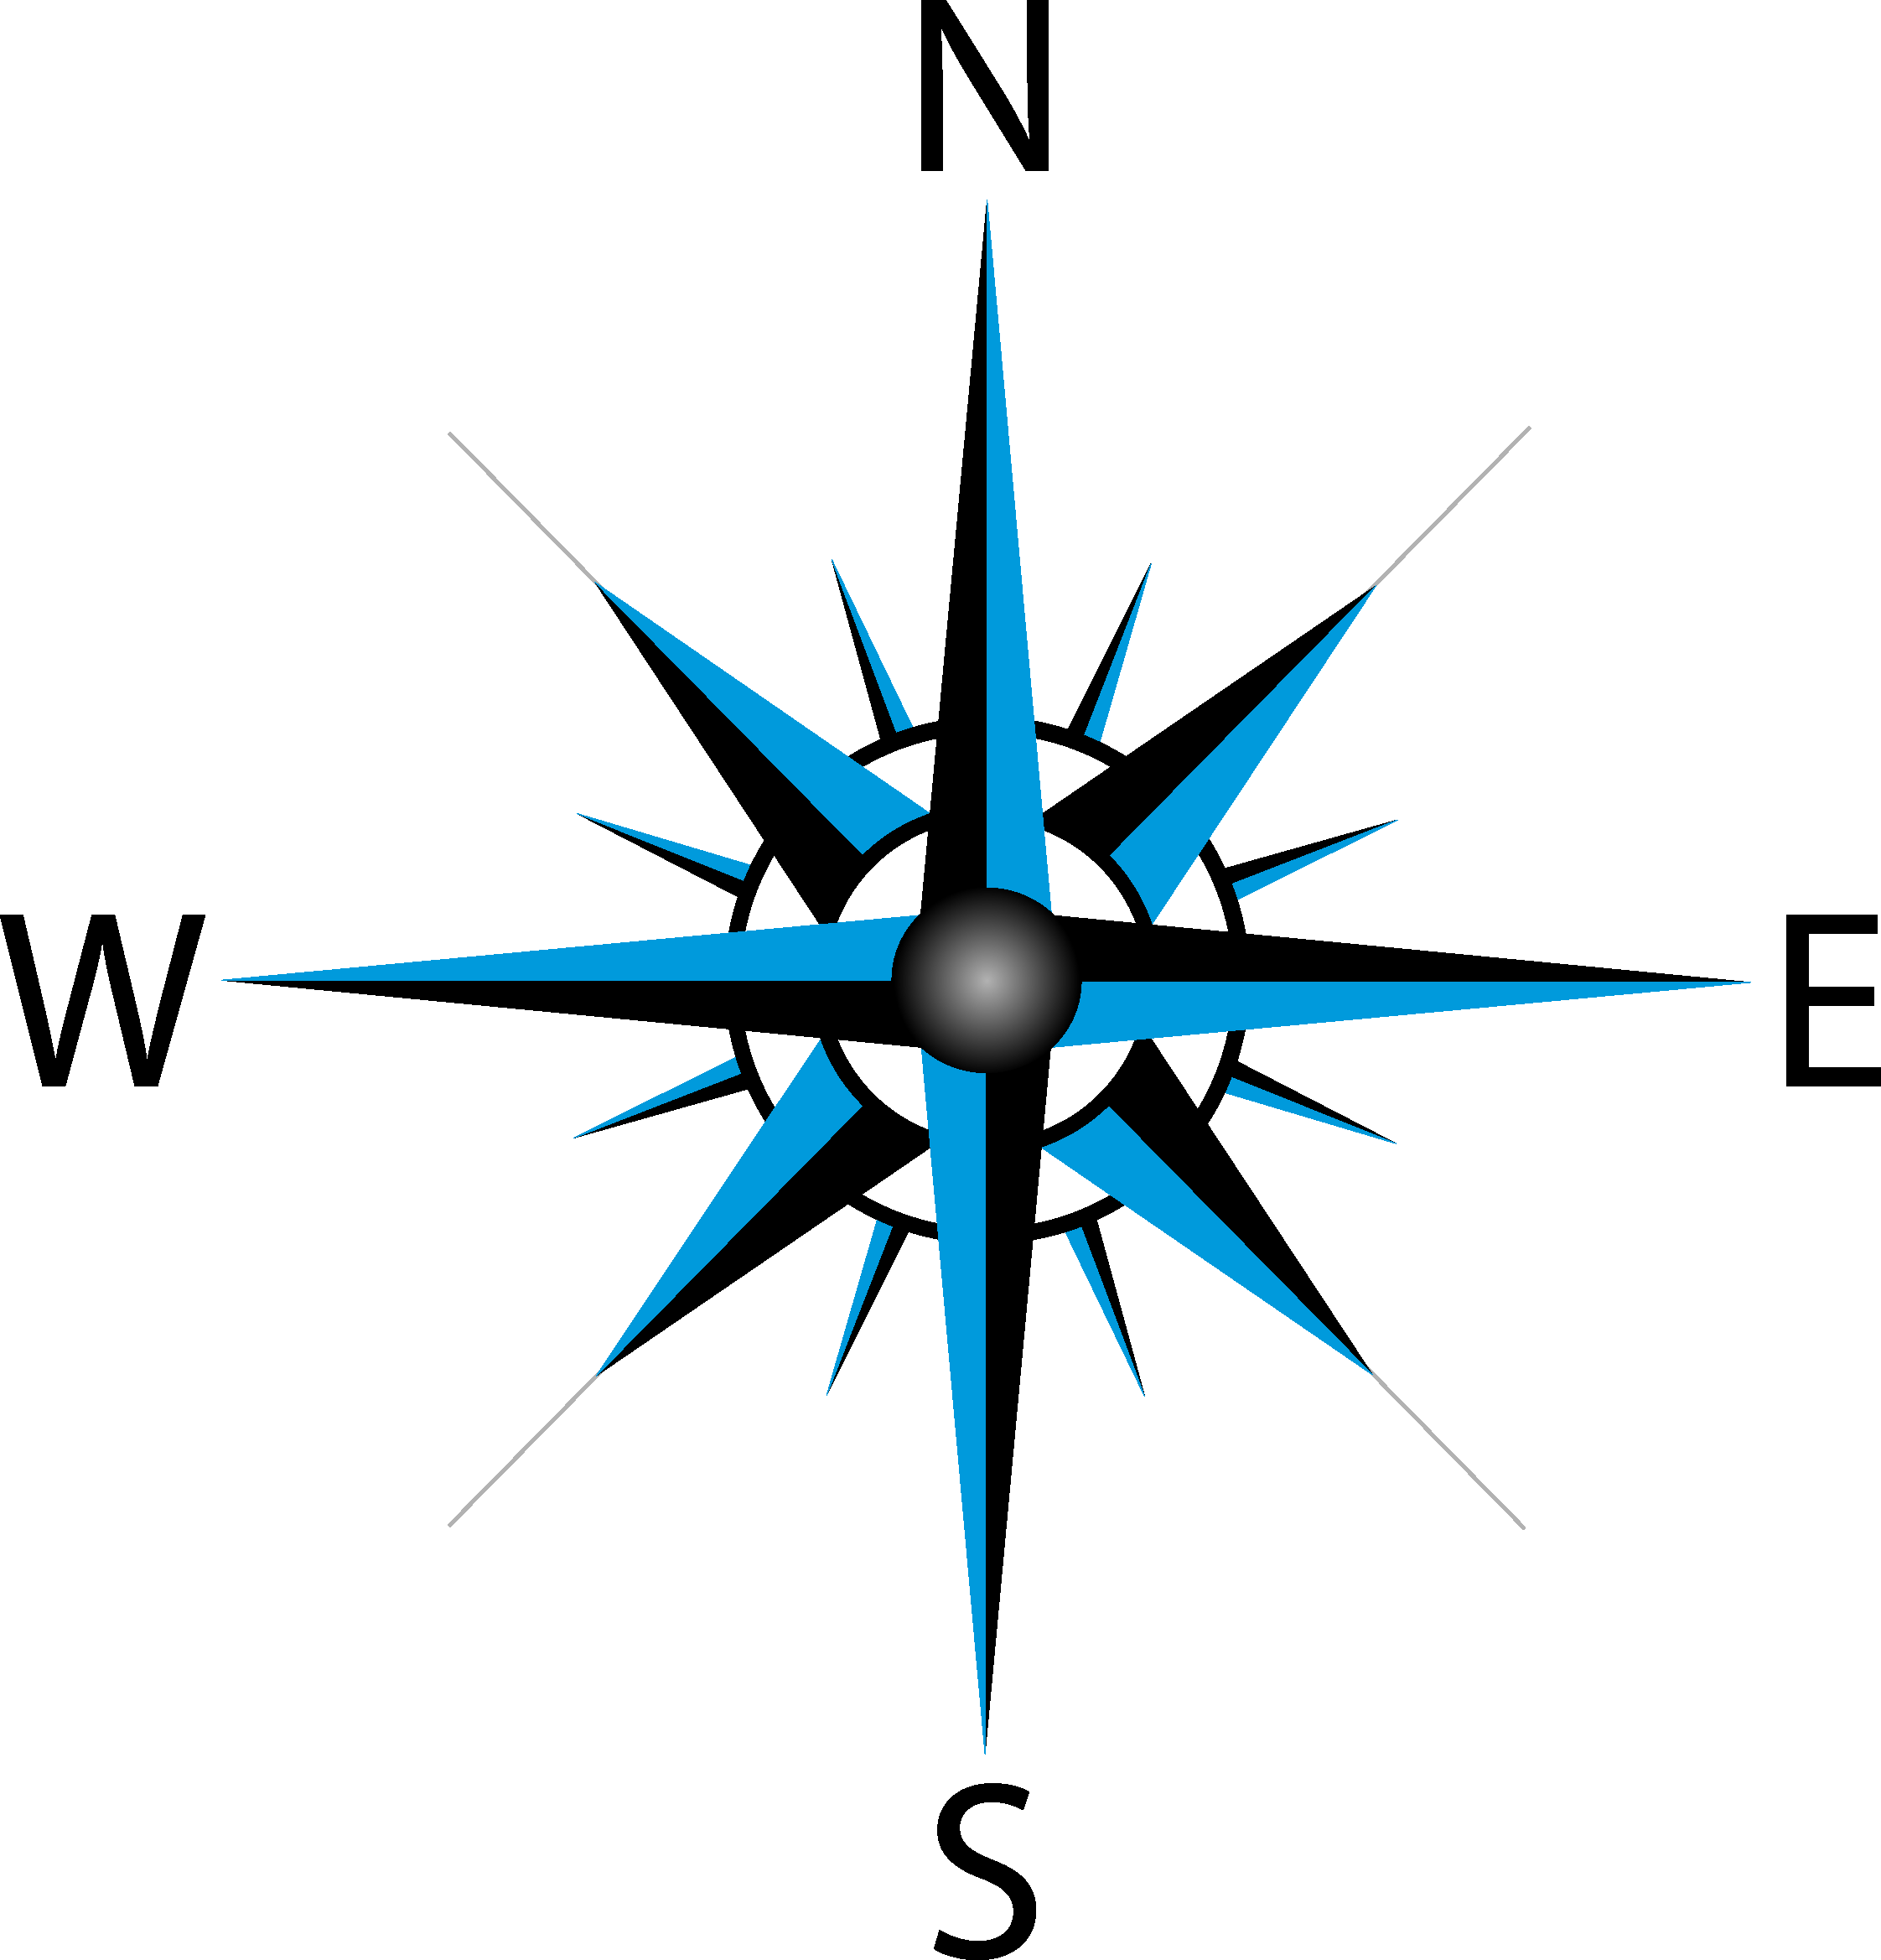 North Compass Rose Drawing - North Compass Rose Drawing (2244x2338)